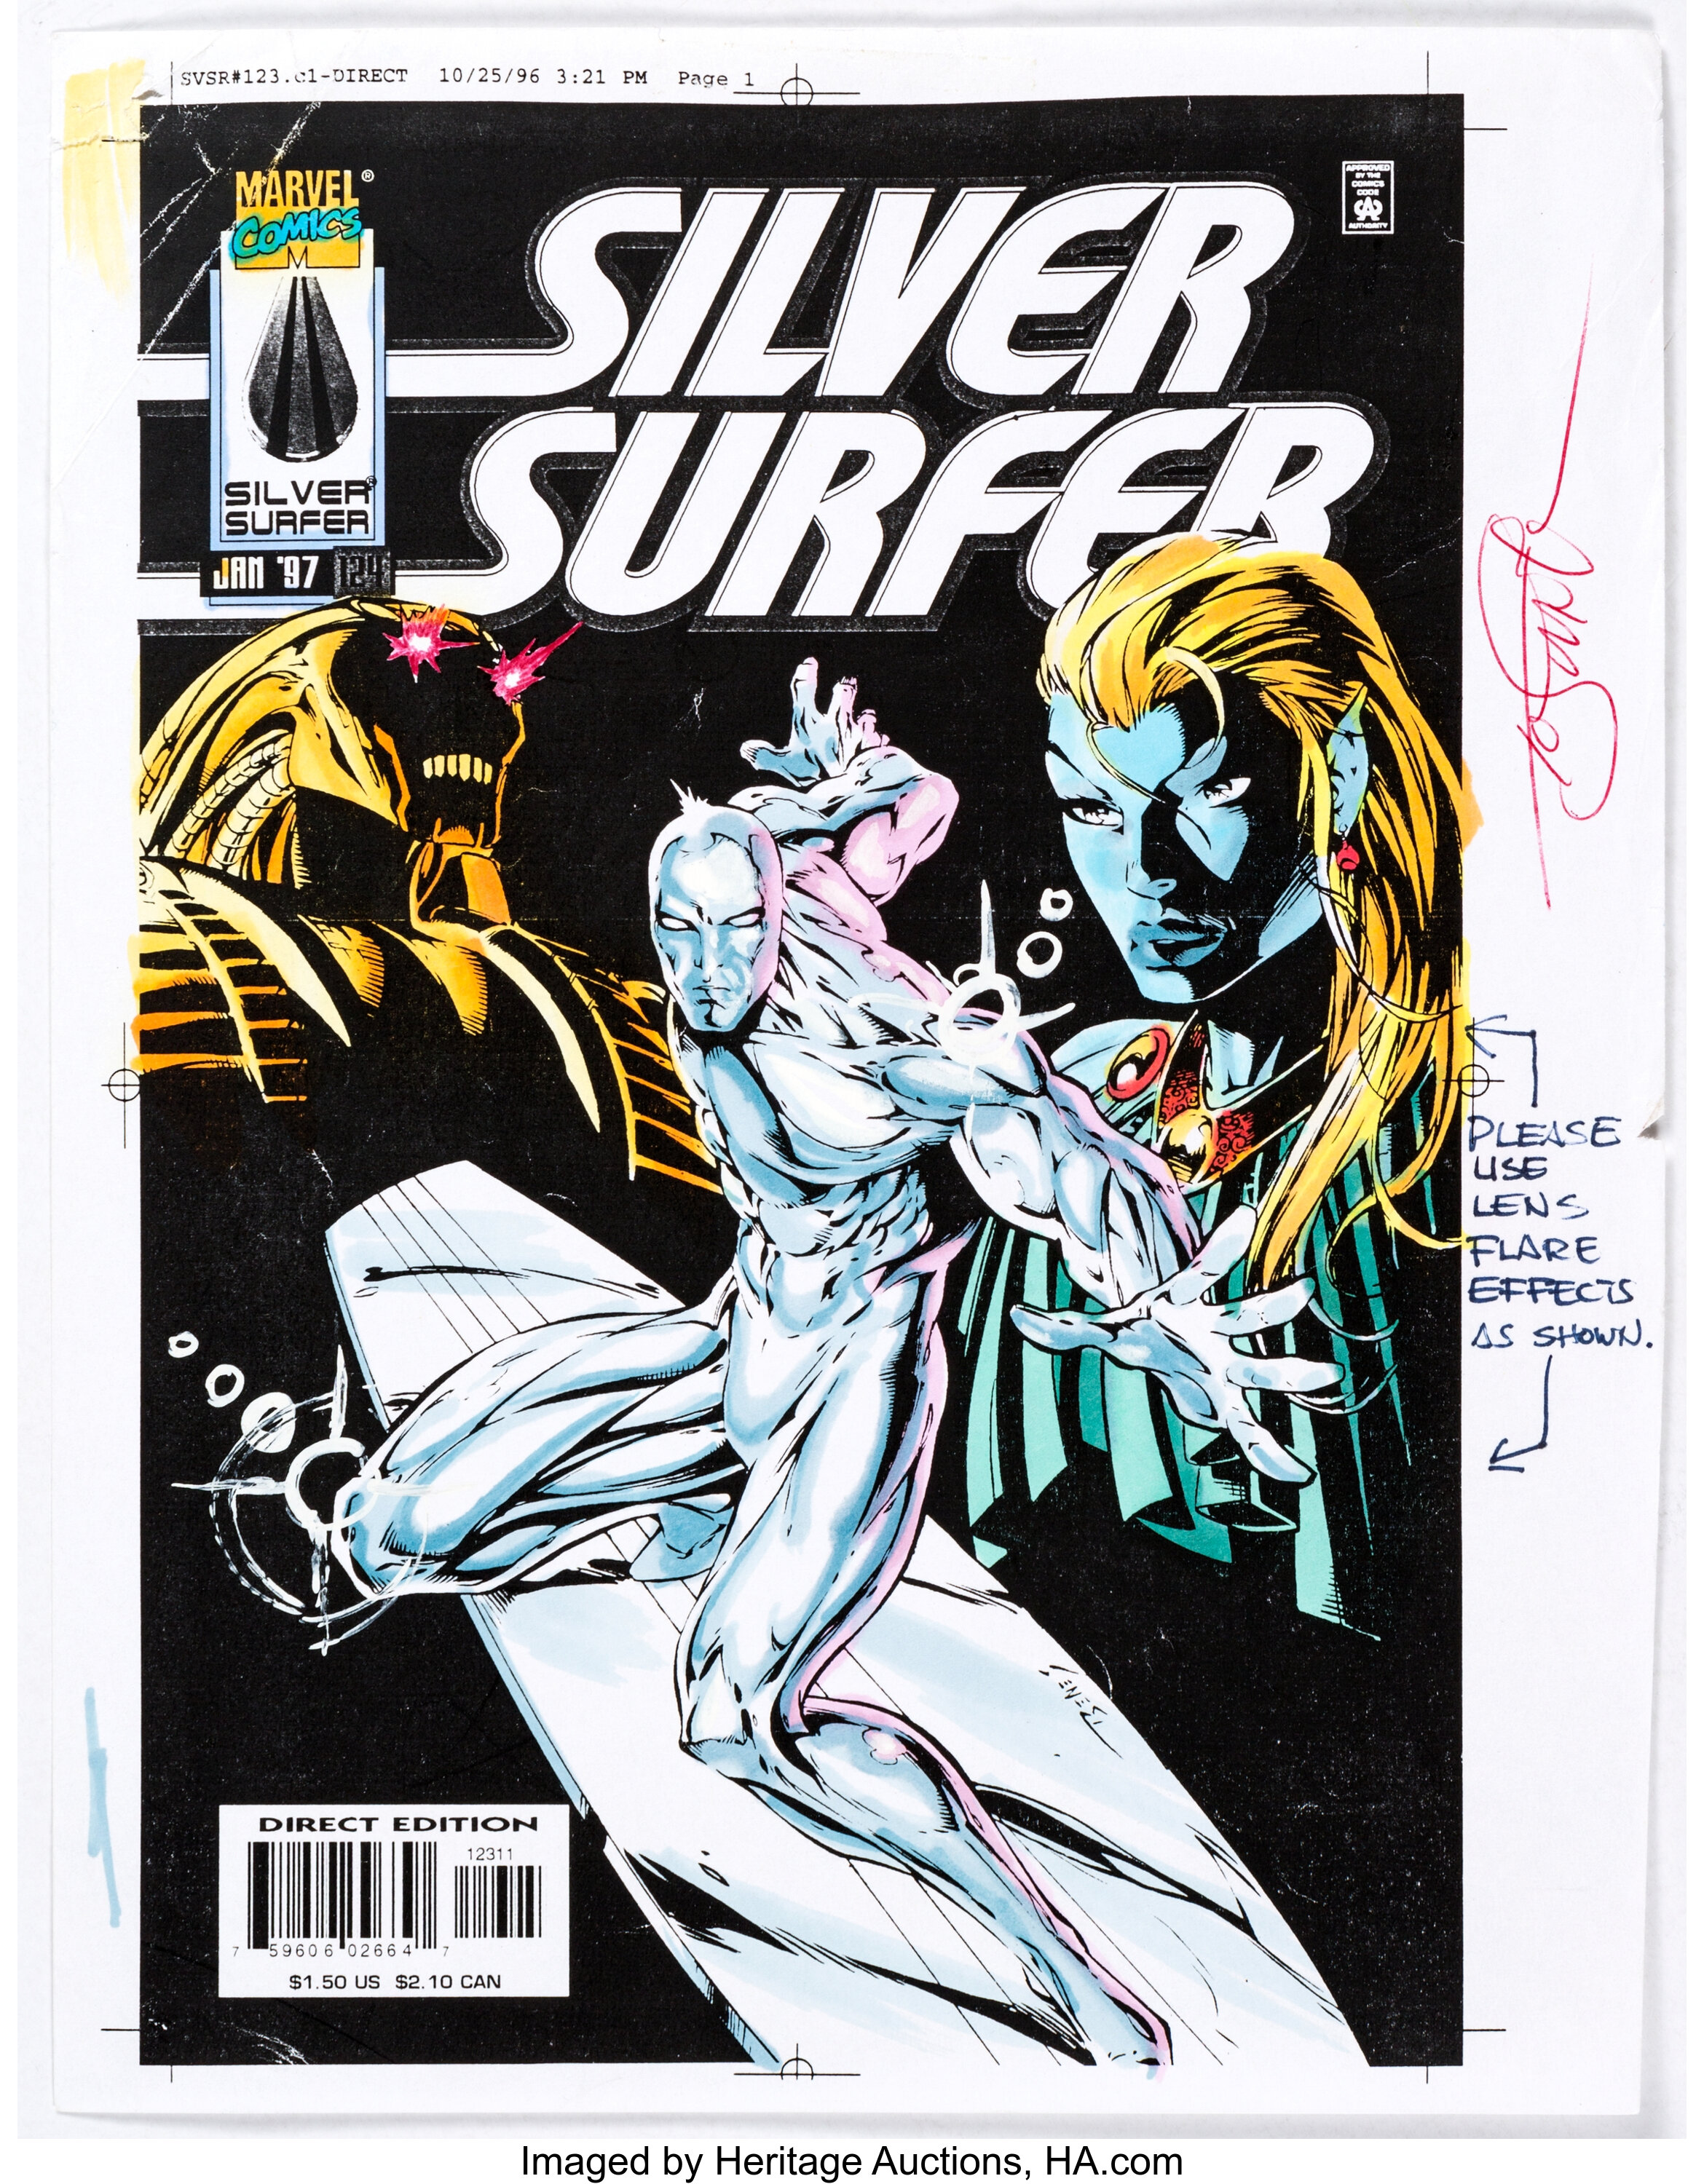 Tom Smith Silver Surfer 124 Cover Color Guide Marvel 1997 Lot 17821 Heritage Auctions